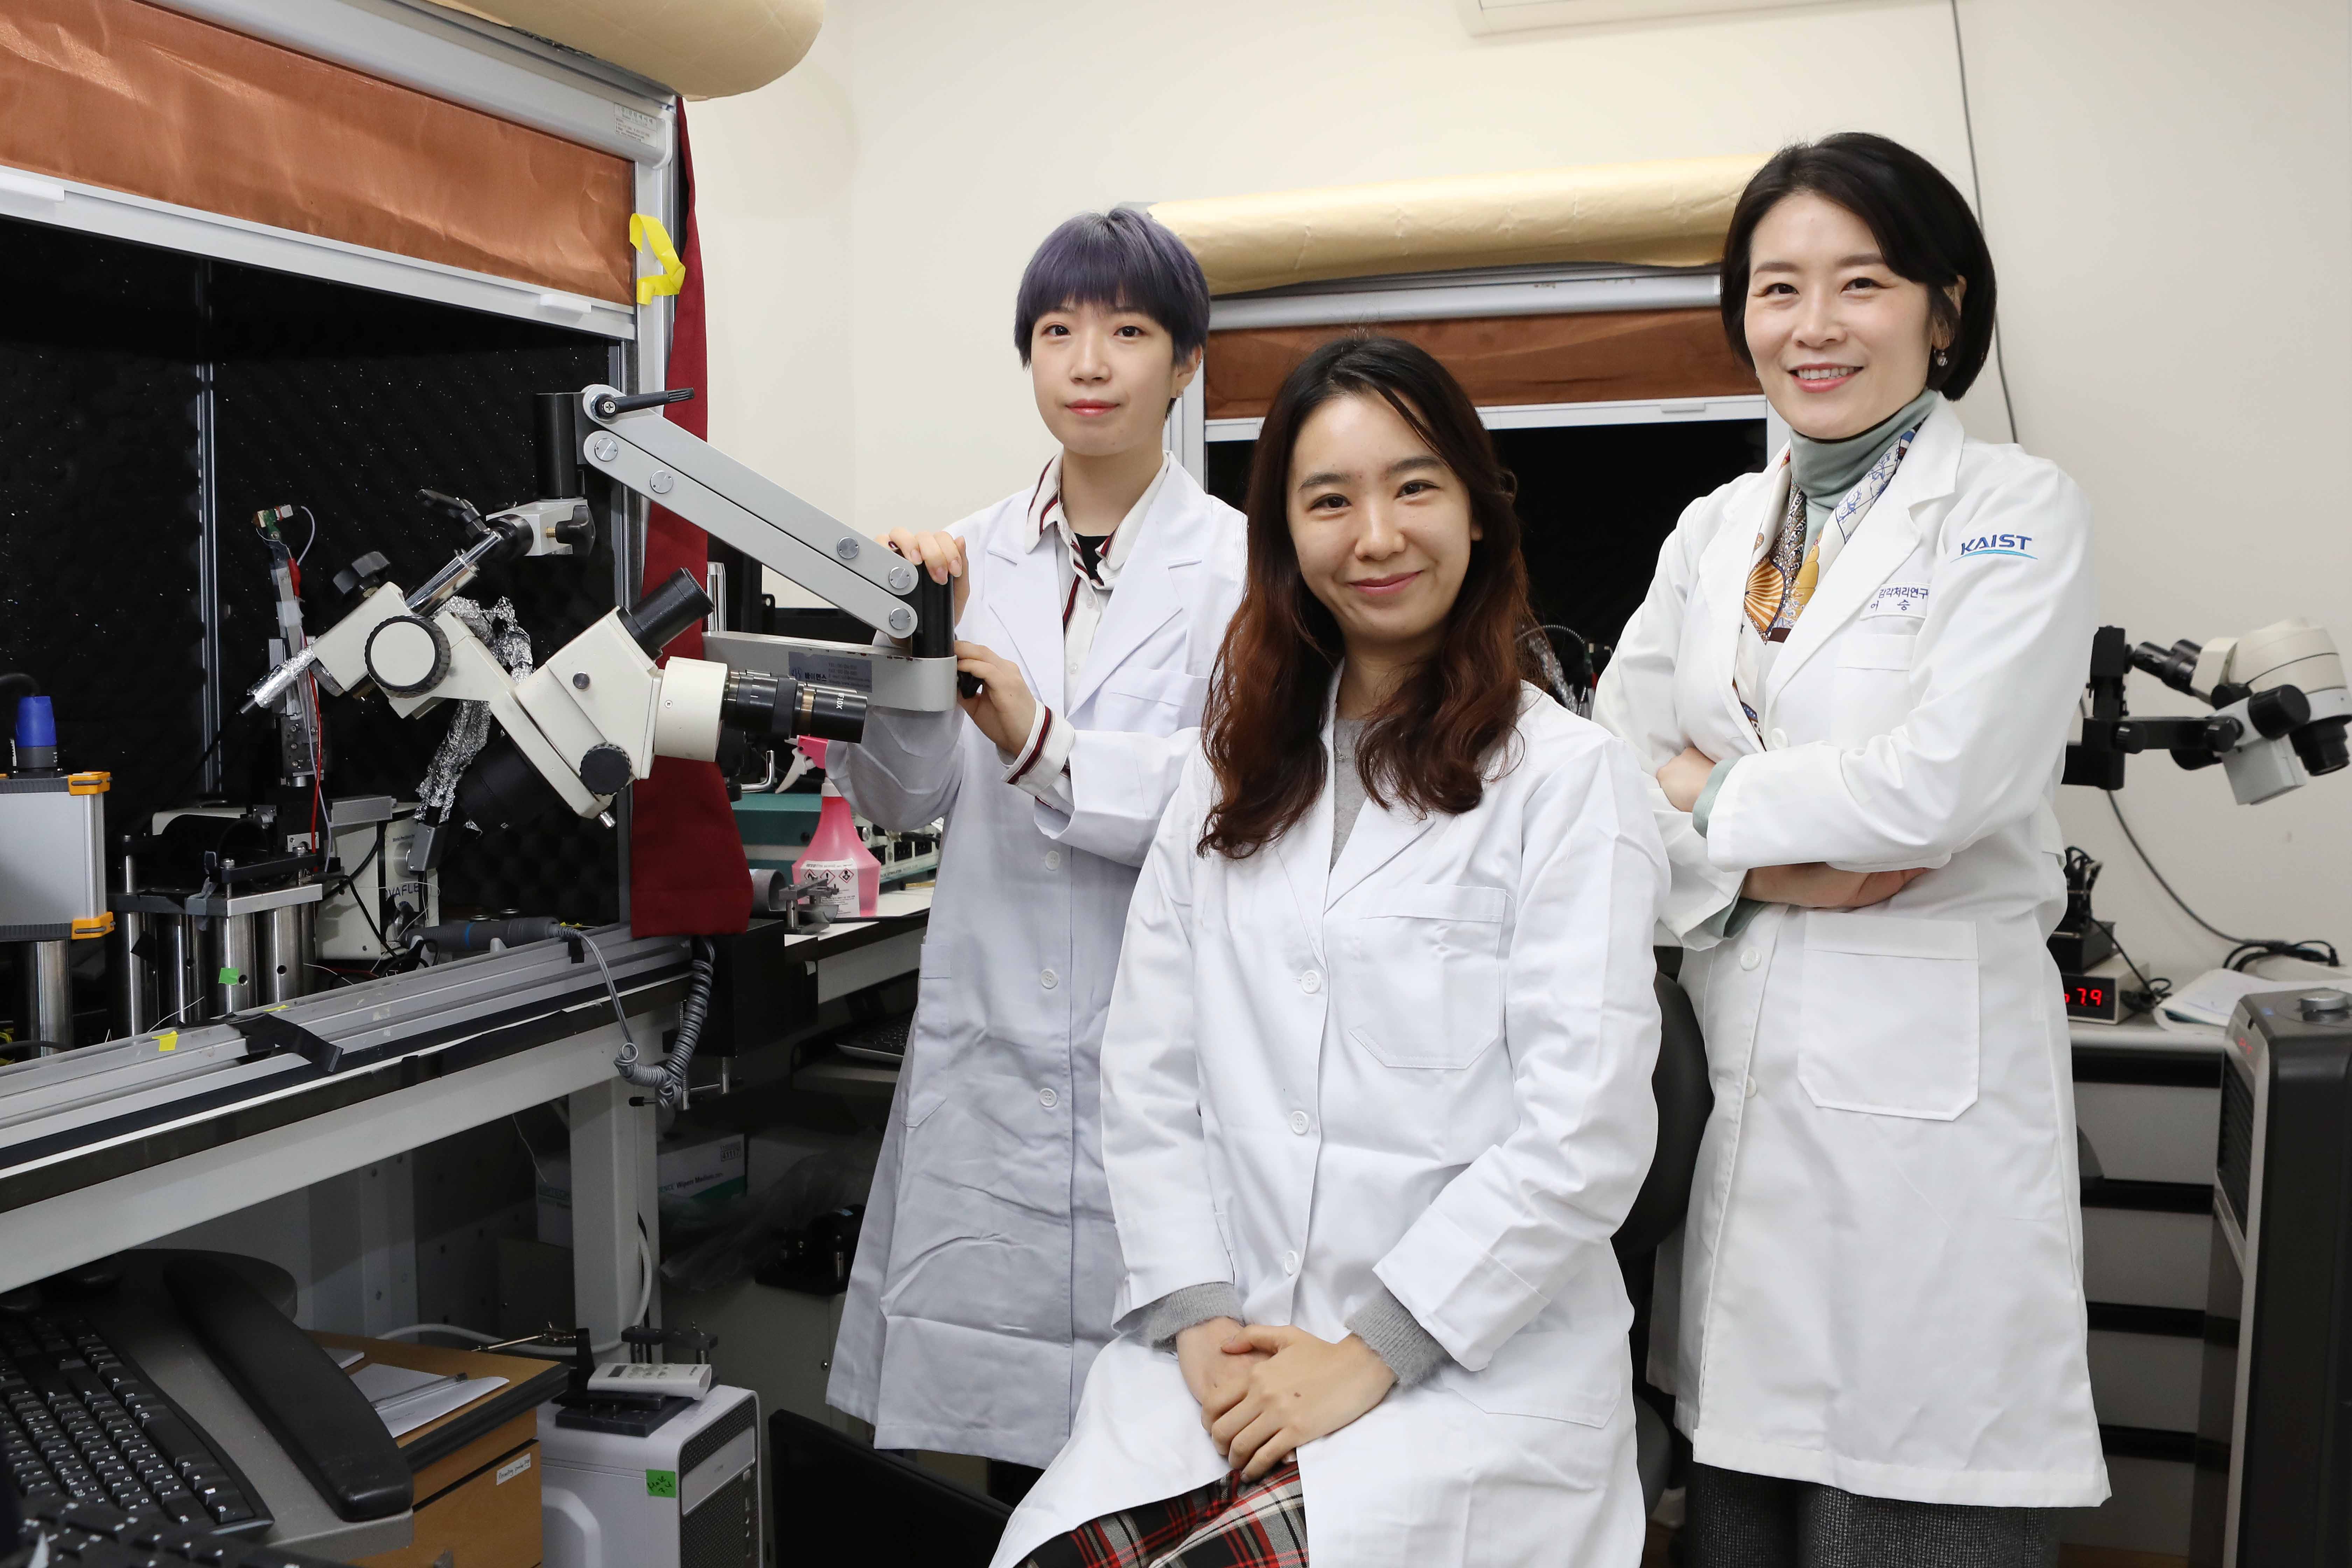 Researcher Yang-Sun Hwang (left), Researcher You-Hyang Song (center), and Professor Seung-Hee Lee (right)